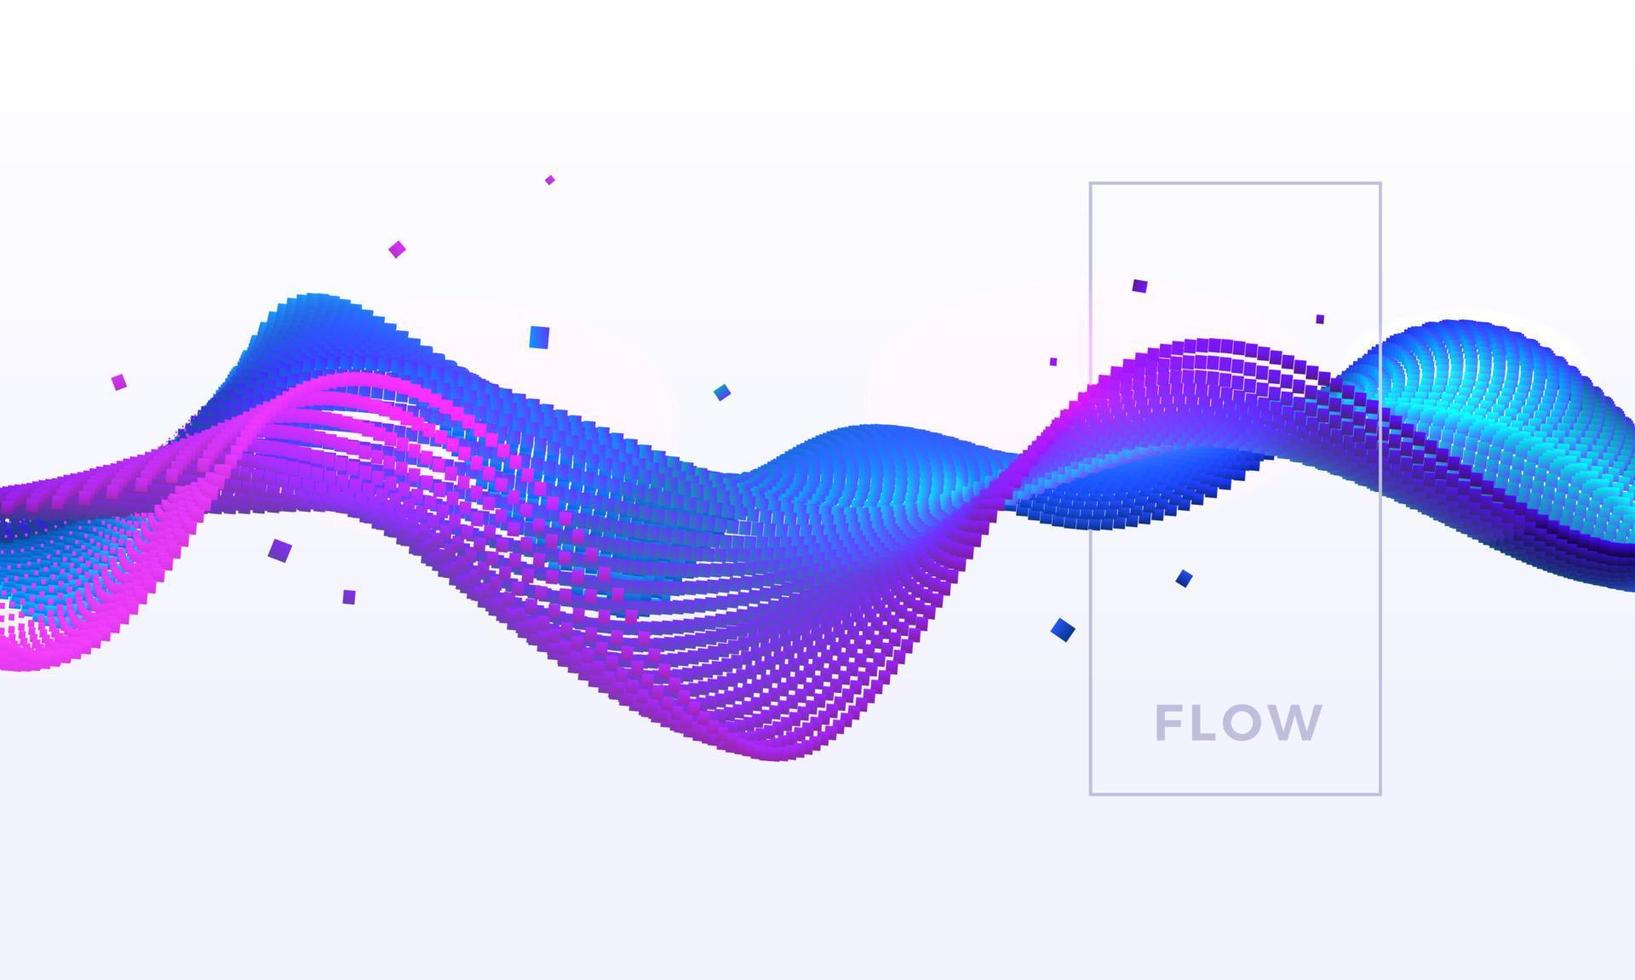 Modern Colorful particle wave background with conceptual element design vector